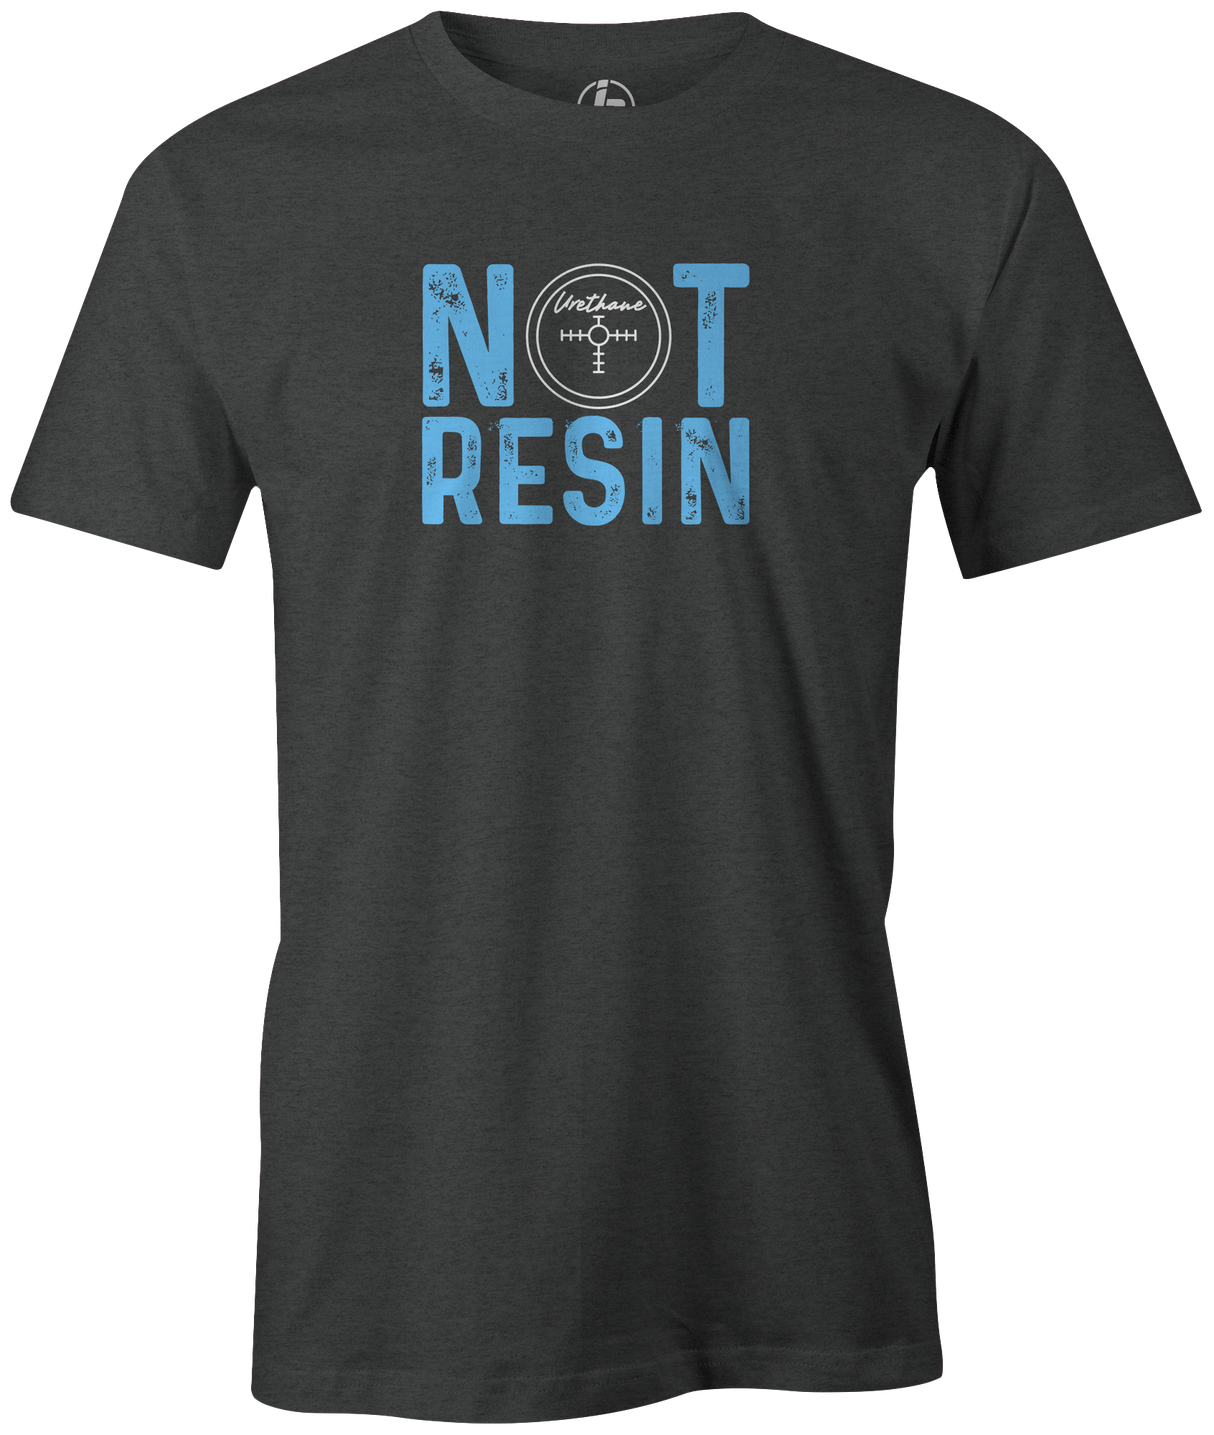 The 80's featured the birth of urethane bowling balls. Remember the Black, Blue, Purple, and Pink Hammers? Flash forward to now, and urethane is back. Support this movement with our "Not Resin" tee.  Tshirt, tee, tee-shirt, tee shirt, Pro shop. League bowling team shirt. PBA. PWBA. USBC. Junior Gold. Youth bowling. Tournament t-shirt. Men's. Bowling ball. urethane. old school. 